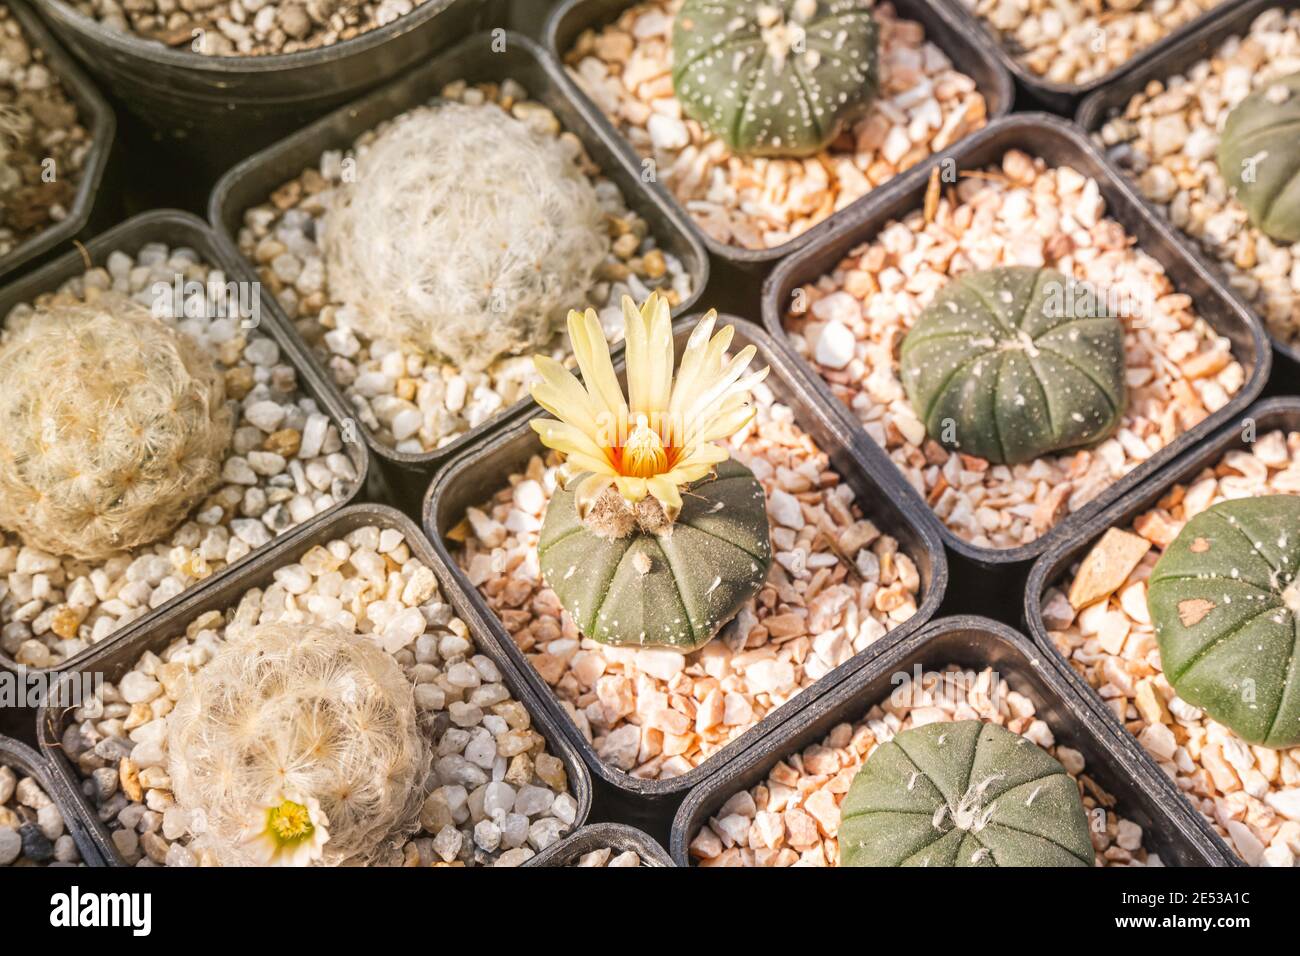 Cactus flowers, Astrophytum asterias with yellow flower is blooming on pot, Succulent, Cacti, Cactaceae, Tree, Drought tolerant plant. Stock Photo